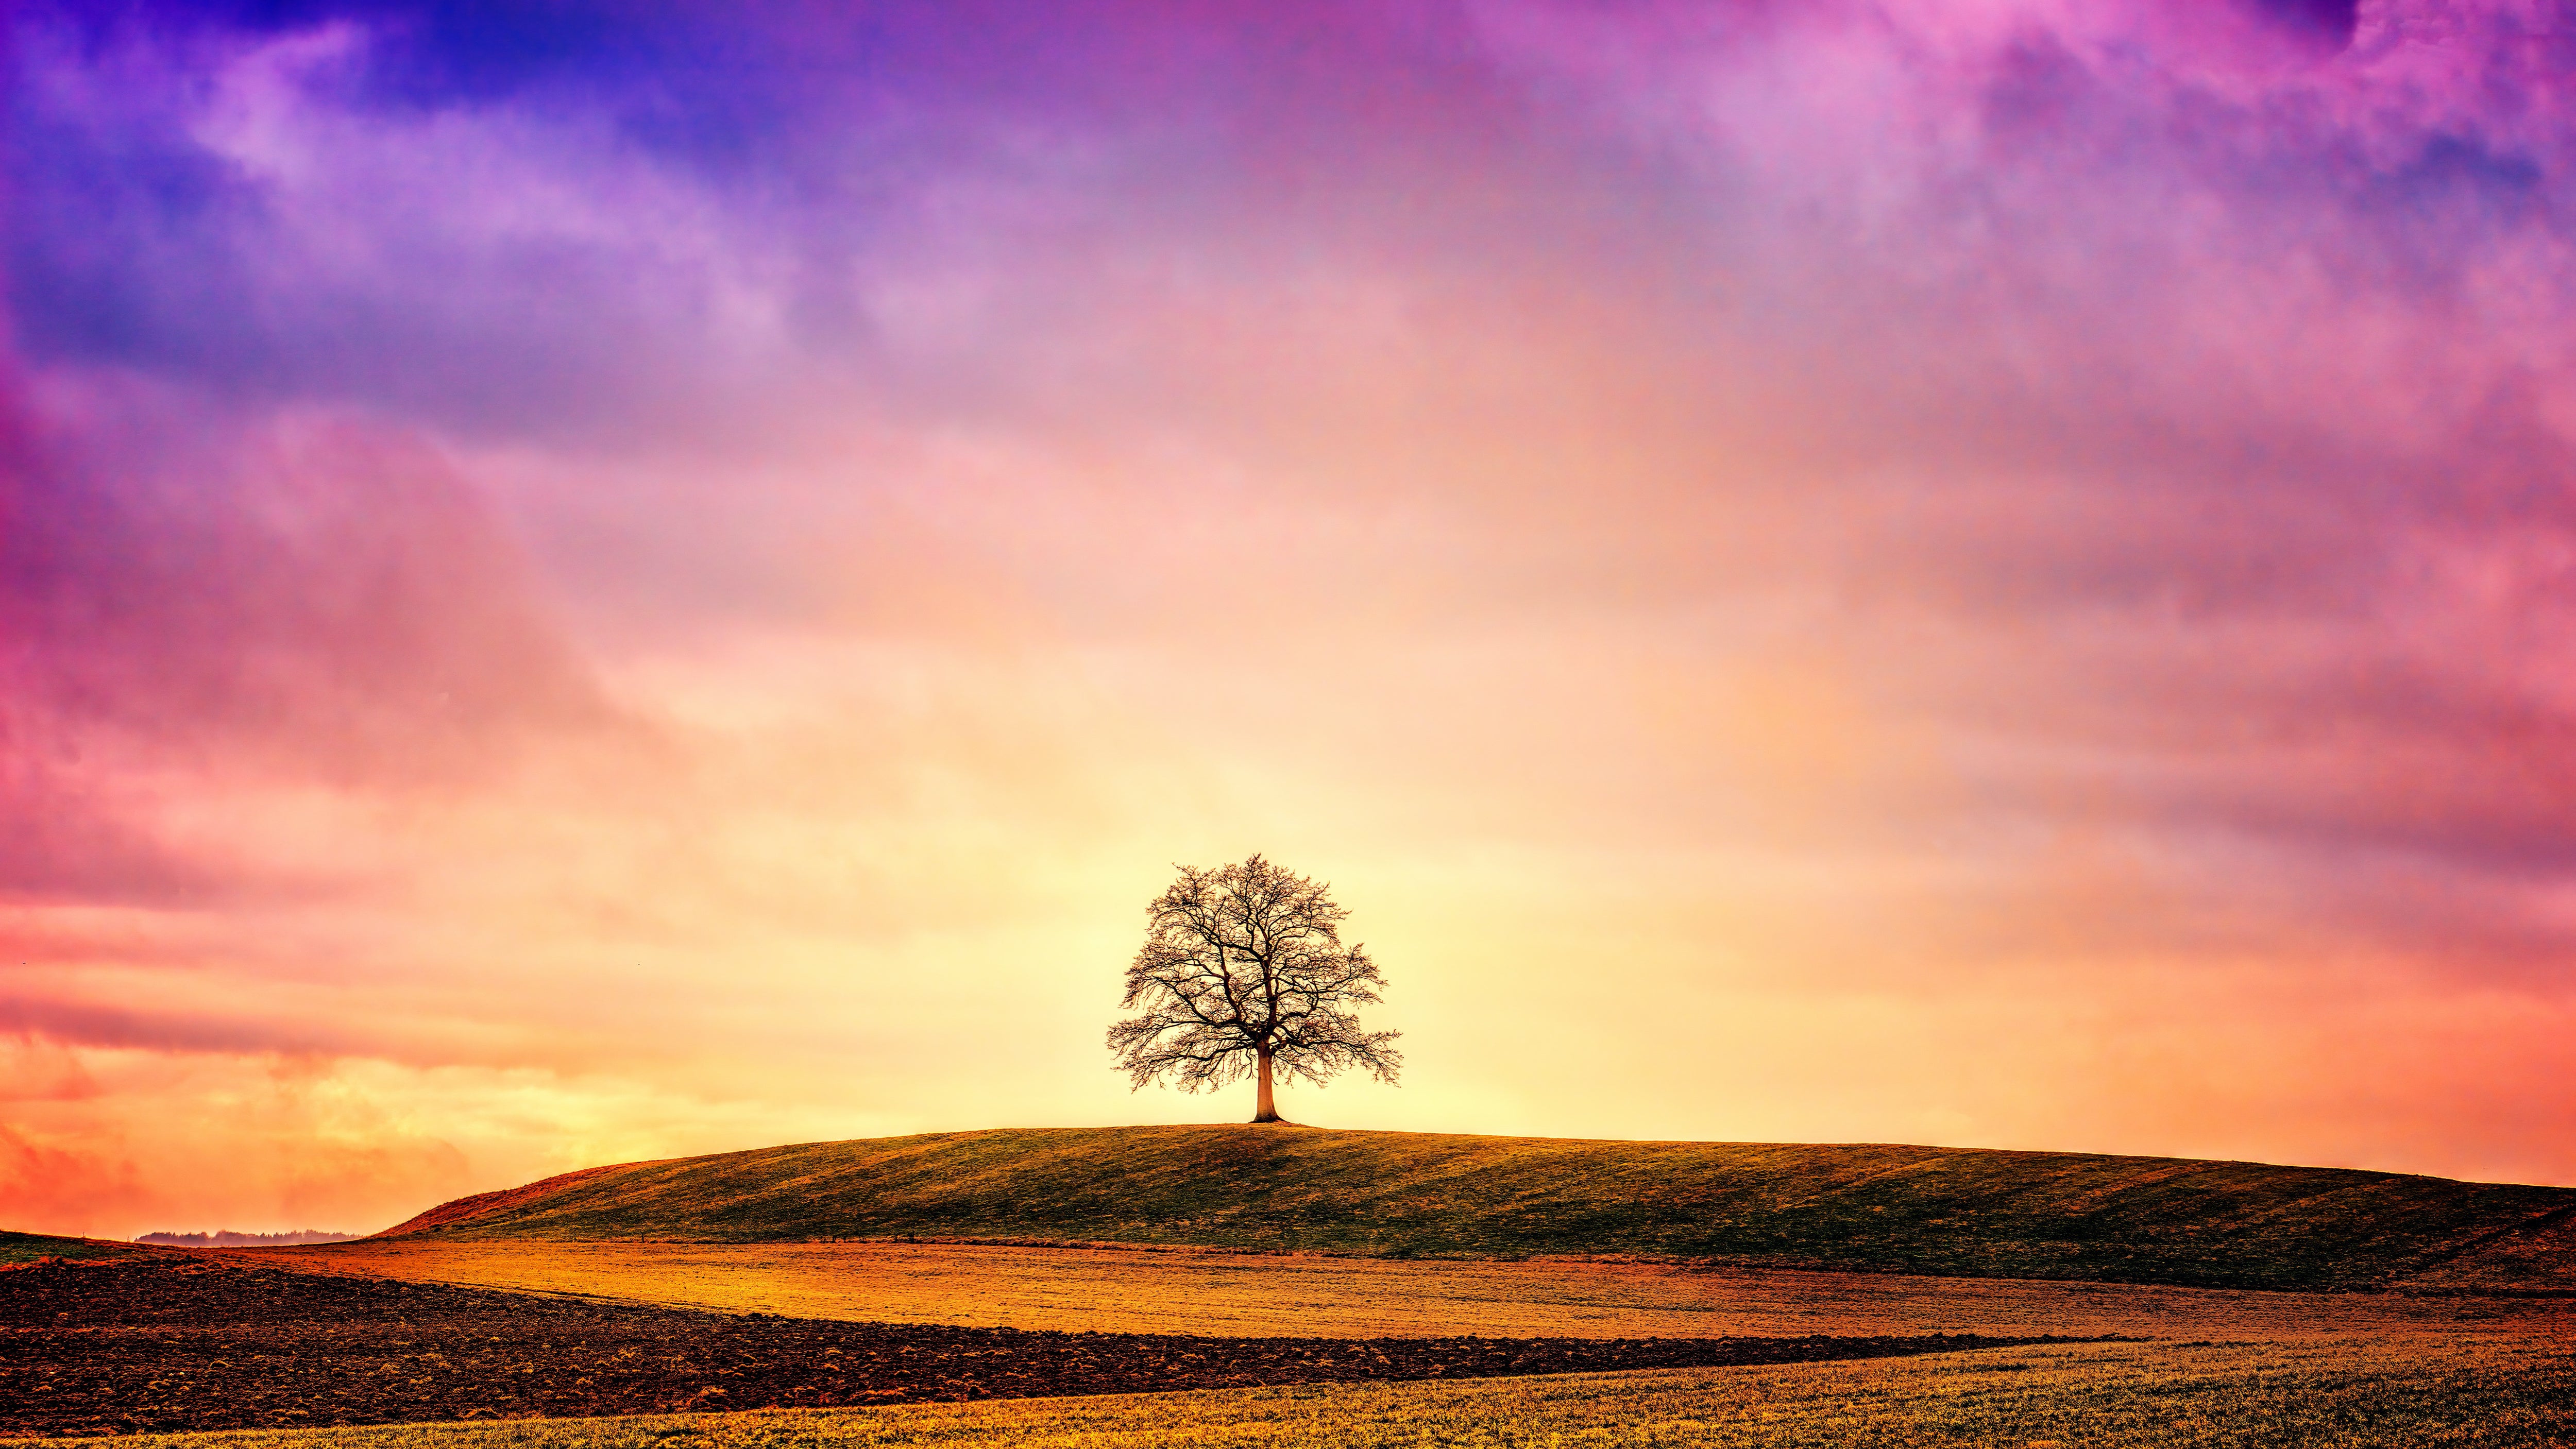 Horizontal Landscape Photo of Tree in Field at Sunset